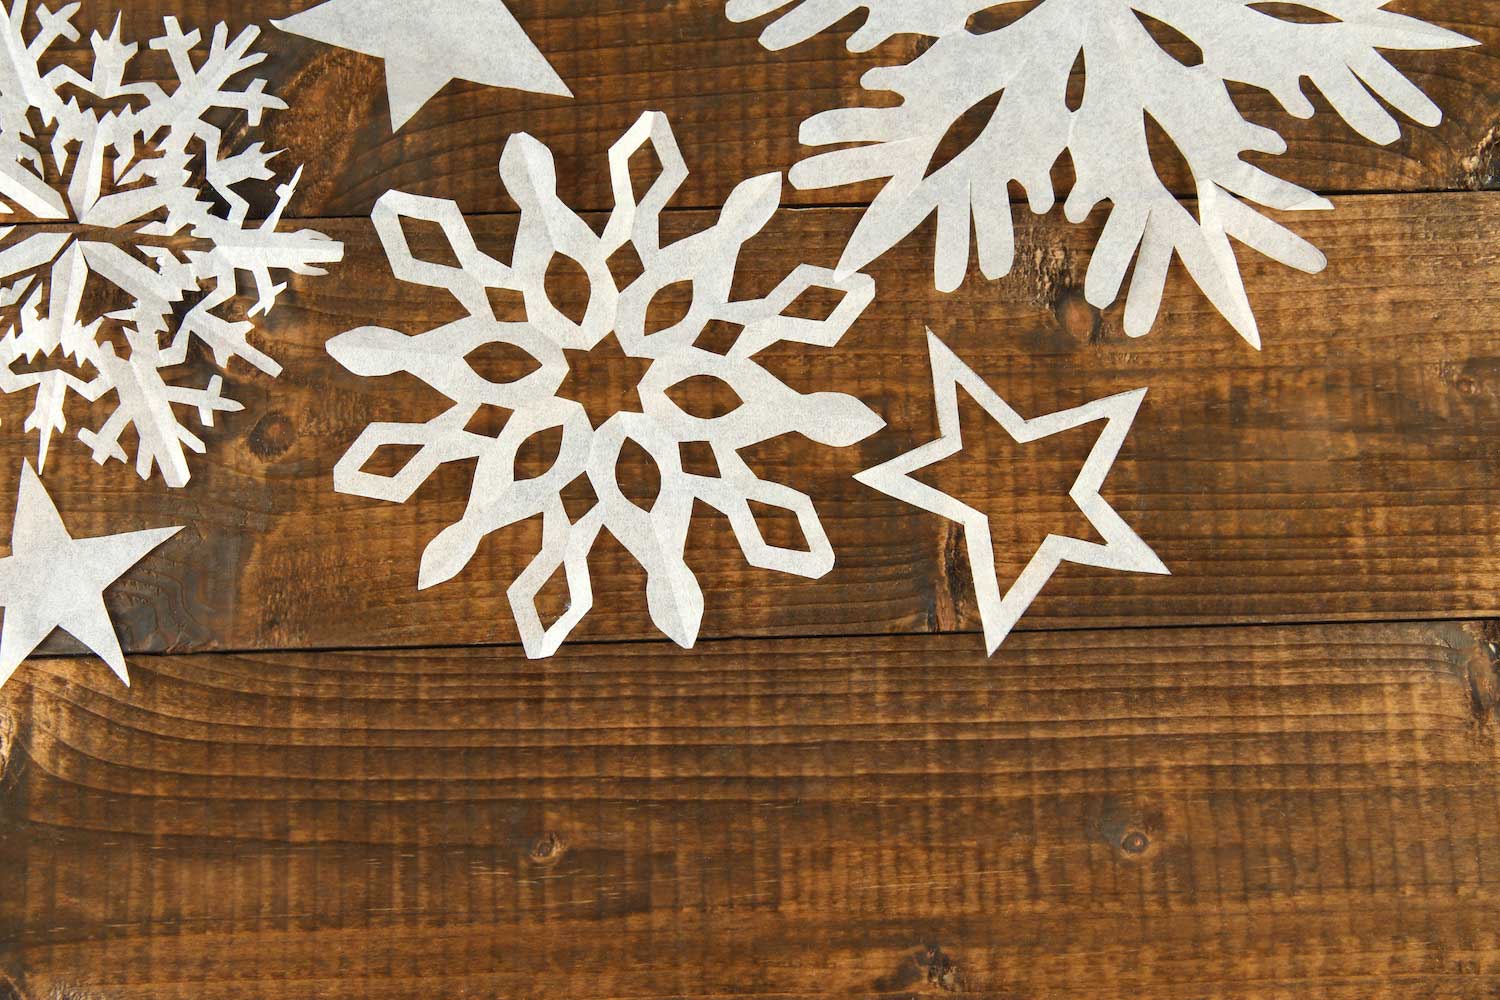 Craft your own snowflake while enjoying winter scenery at Four Rivers